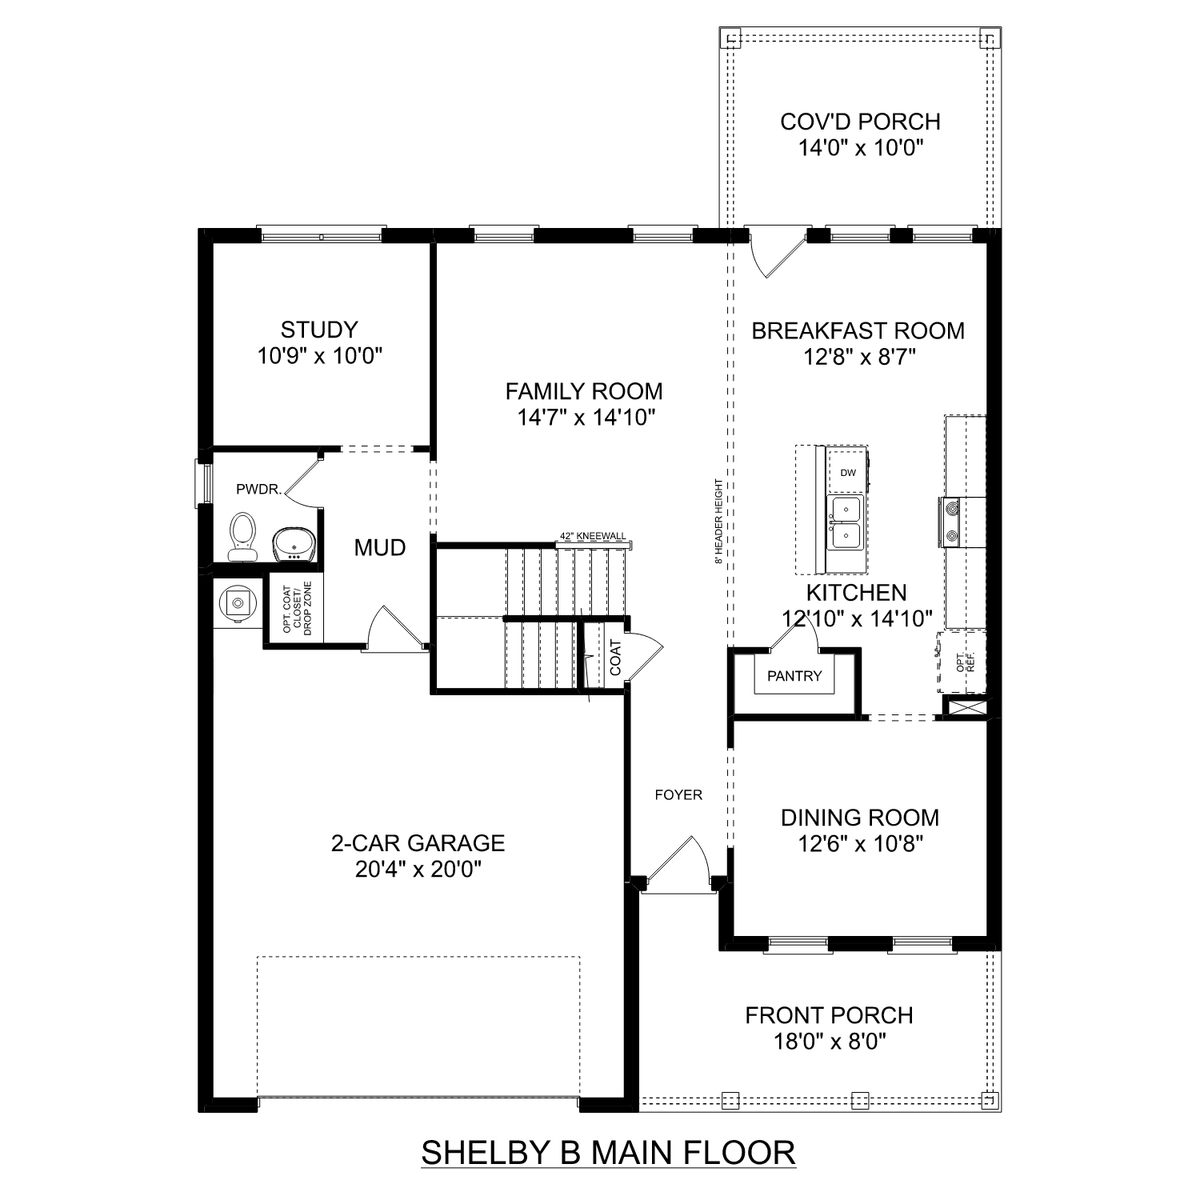 1 - The Shelby B buildable floor plan layout in Davidson Homes' Williams Pointe community.